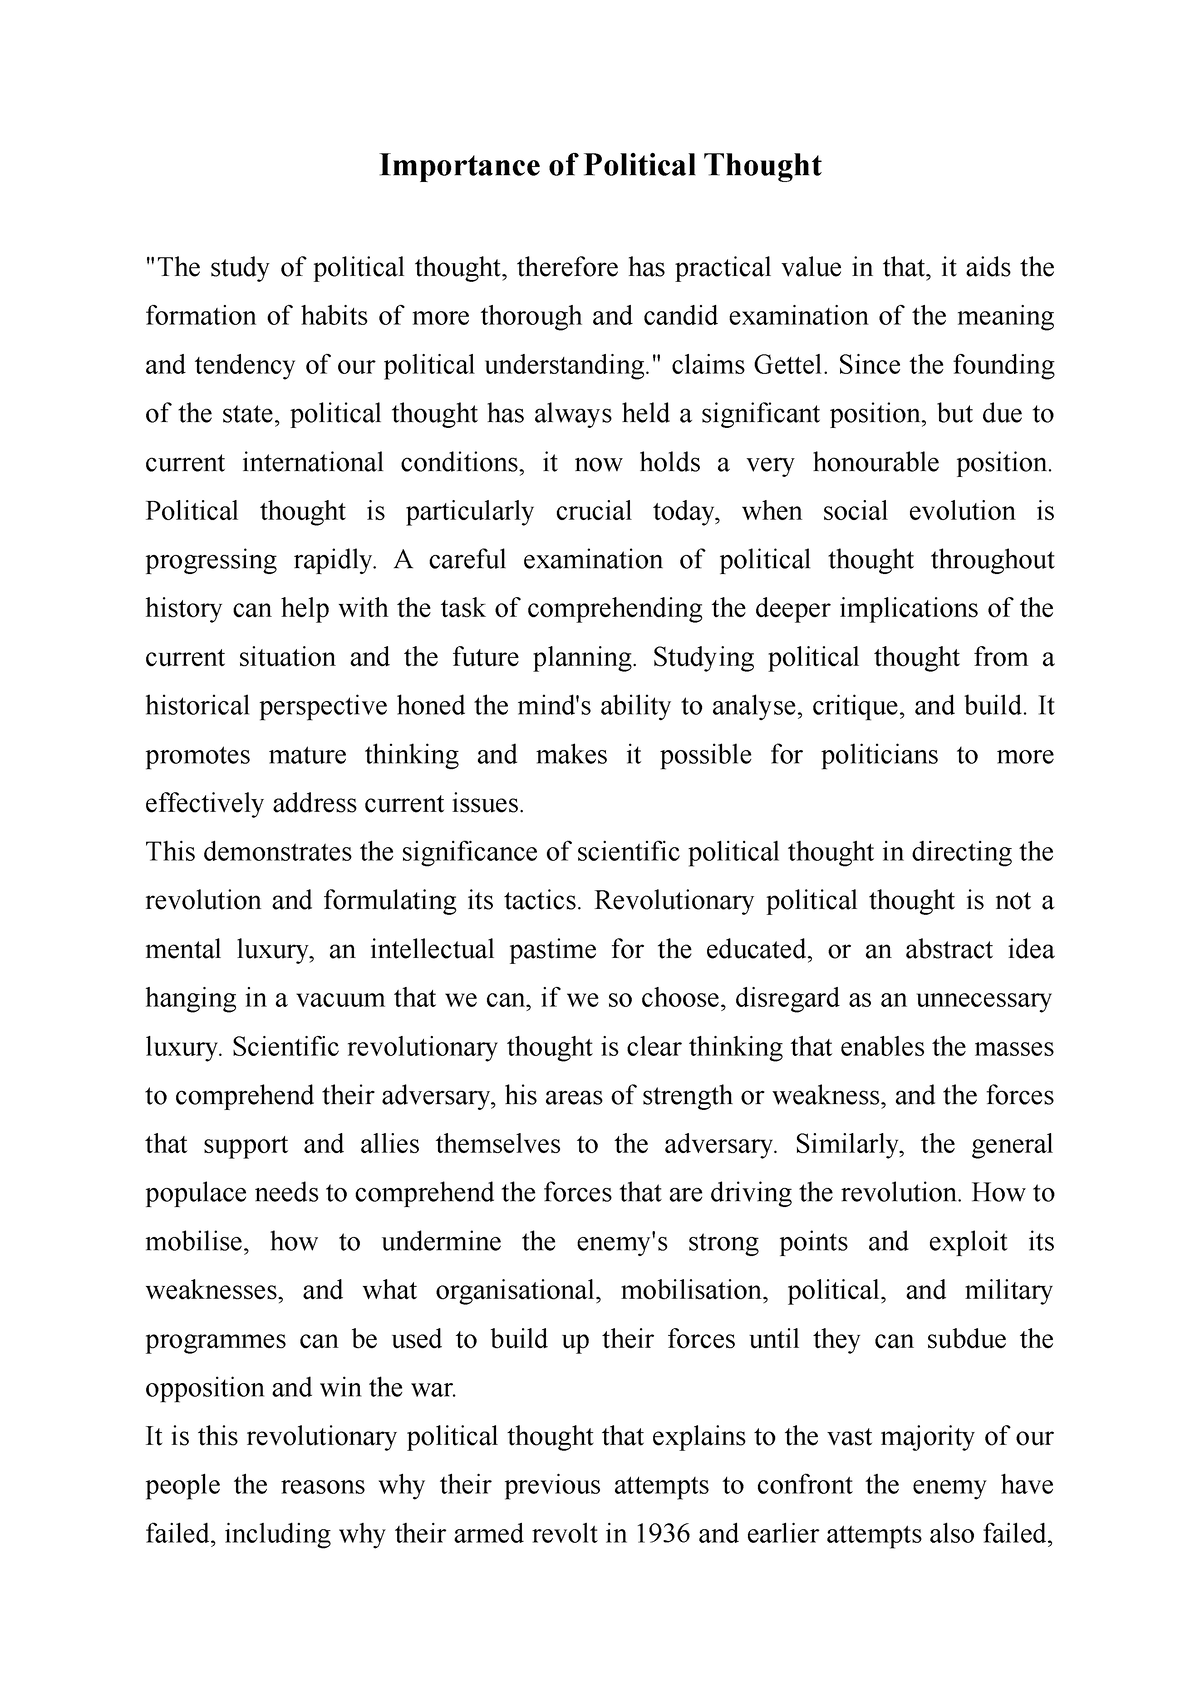 importance of political thought essay